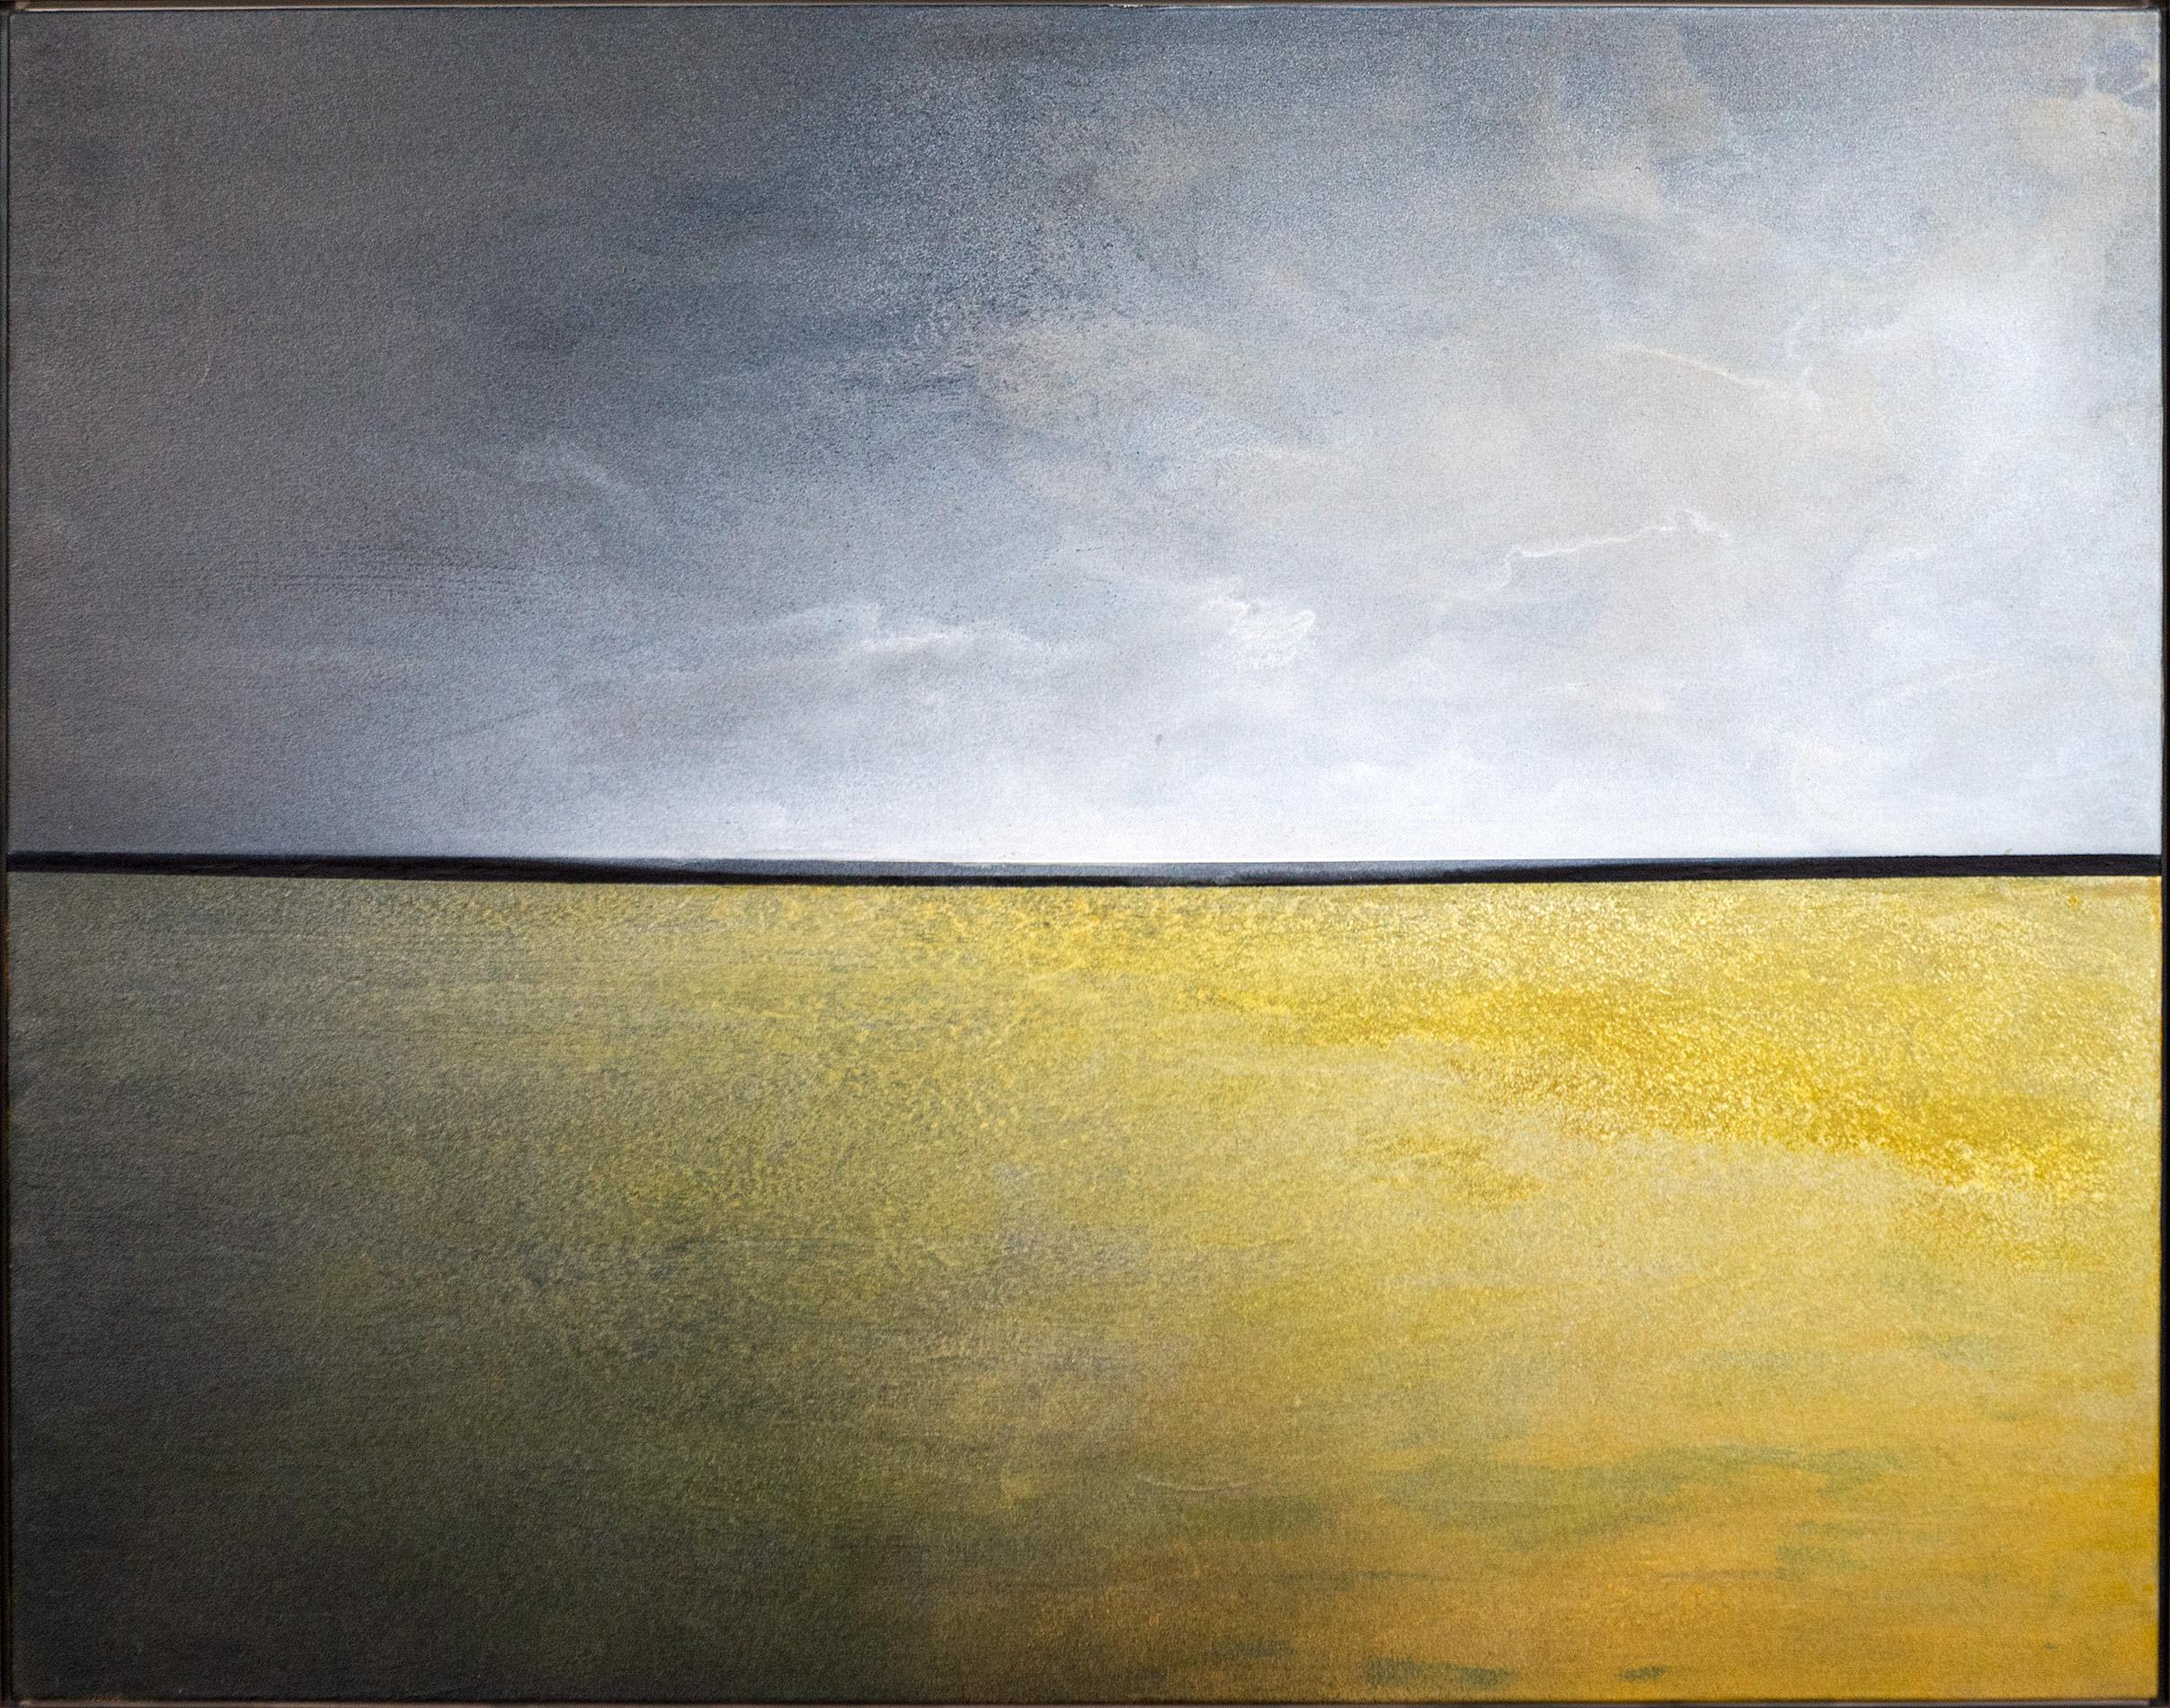 Haze - warm, gestural, contemporary, landscape, acrylic on canvas - Painting by Sasha Rogers